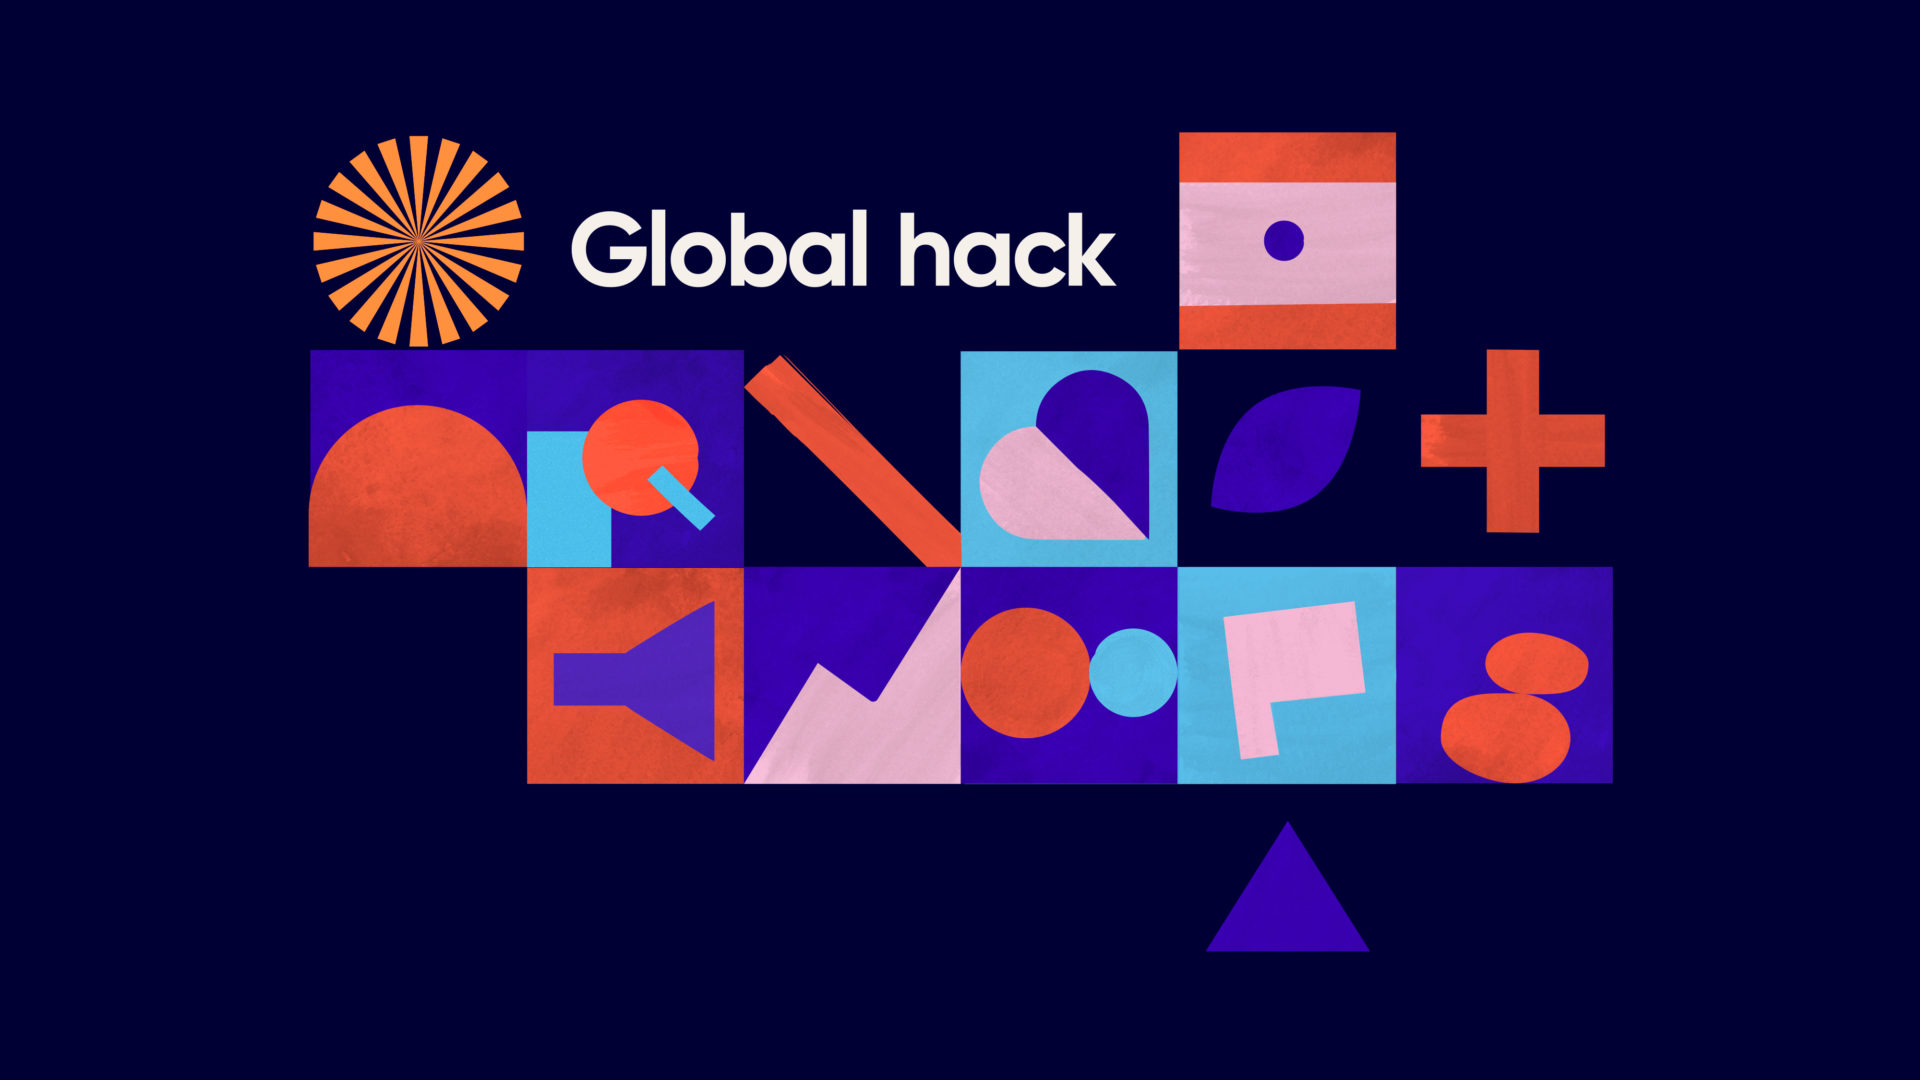 Register today for Global Hack and shape the post-COVID-19 future